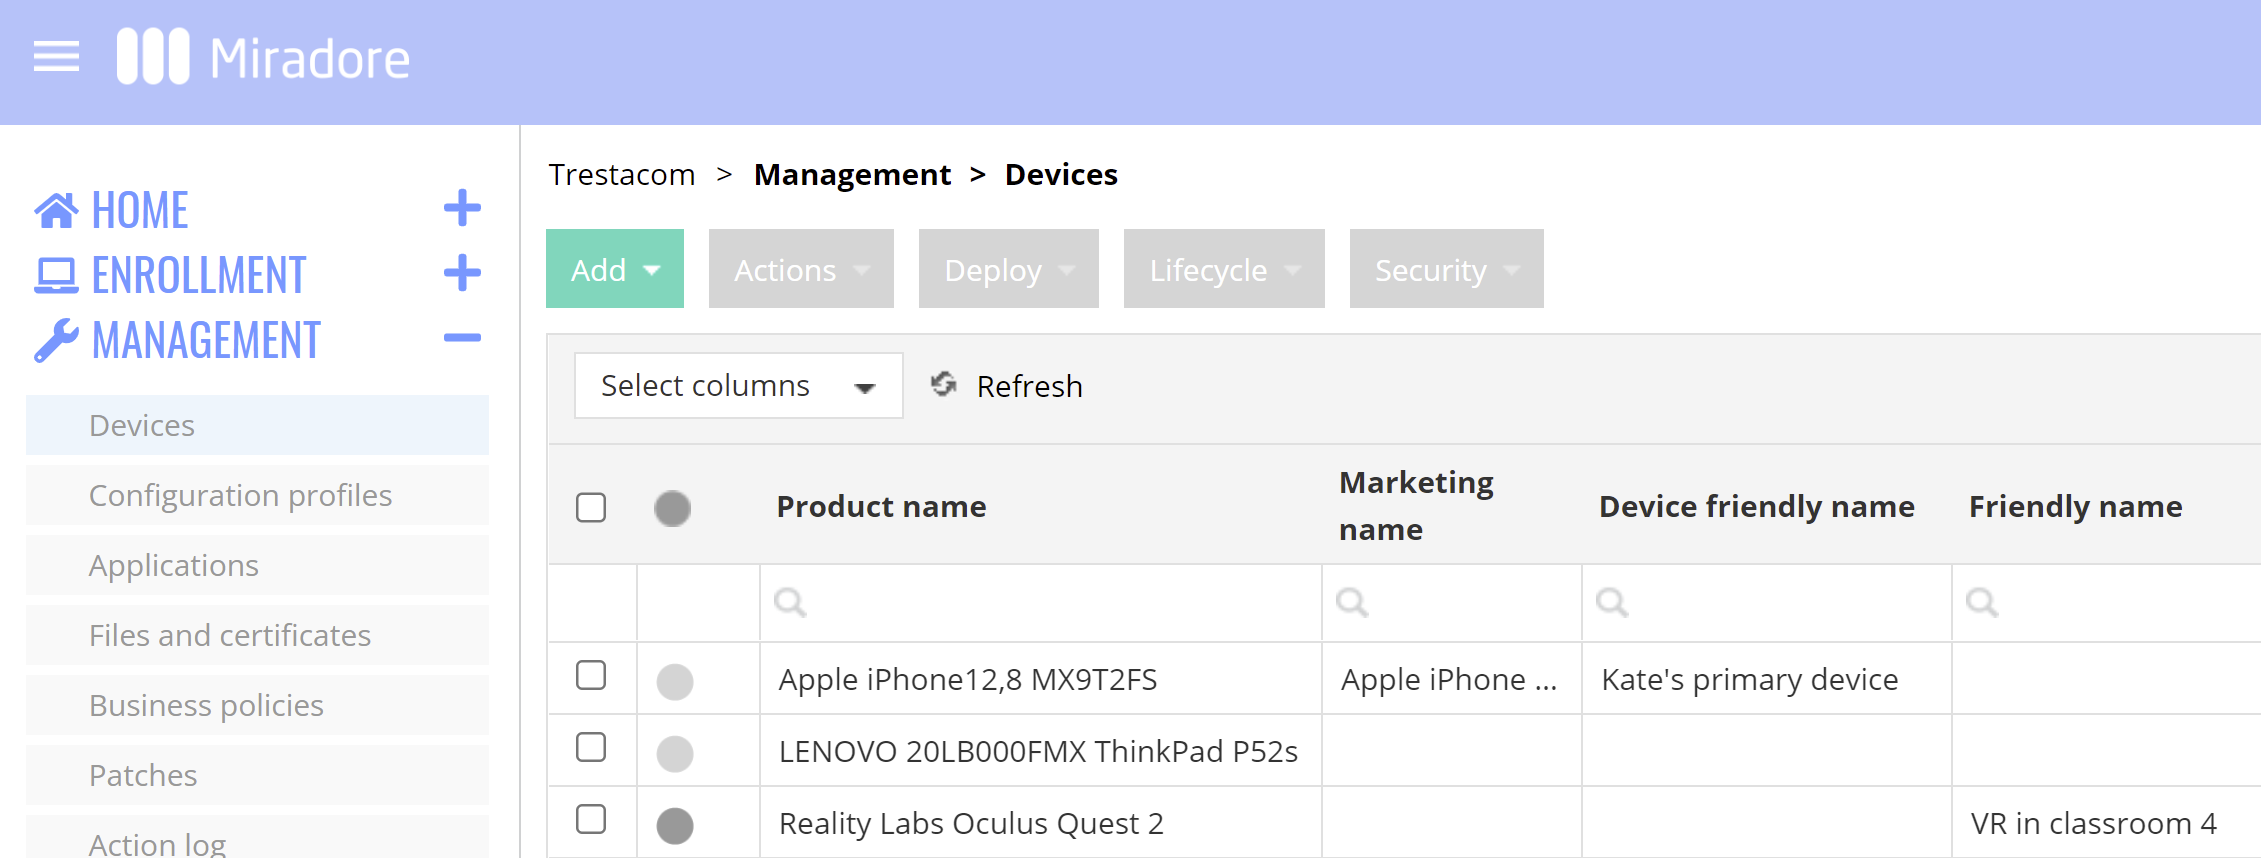 Friendly name column shows on the Devices page.